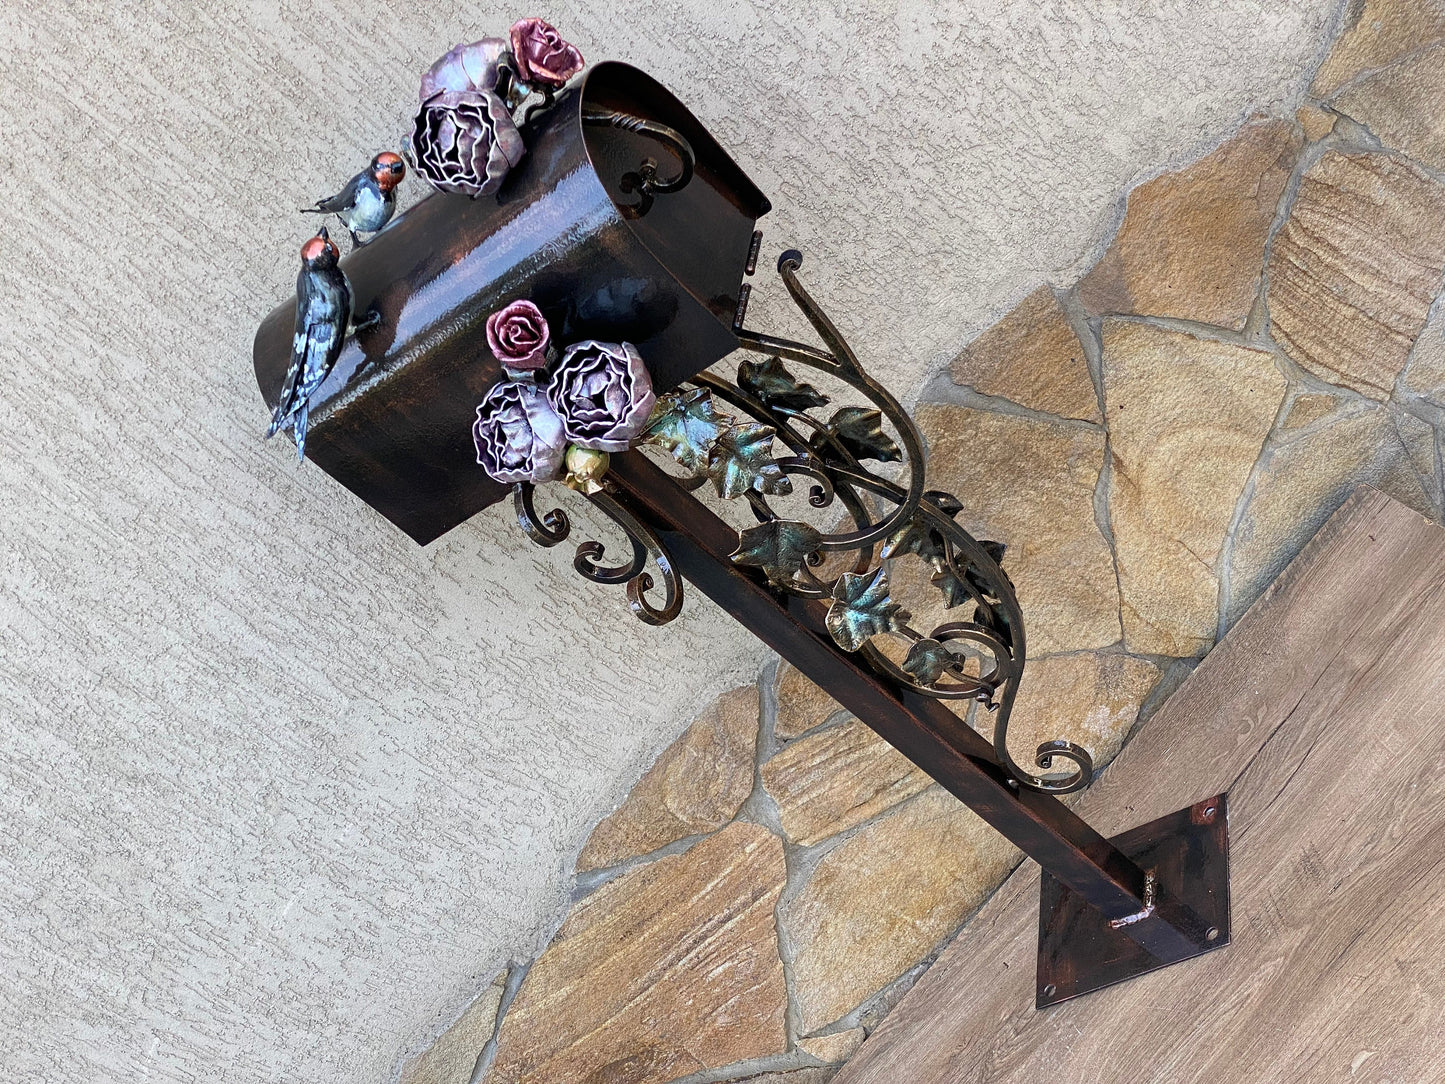 Mailbox, floral gift, birds, wild nature, gift for mom, grandma, steel gift, military gift, pension, BBQ,wife,new house,outdoors,blacksmith